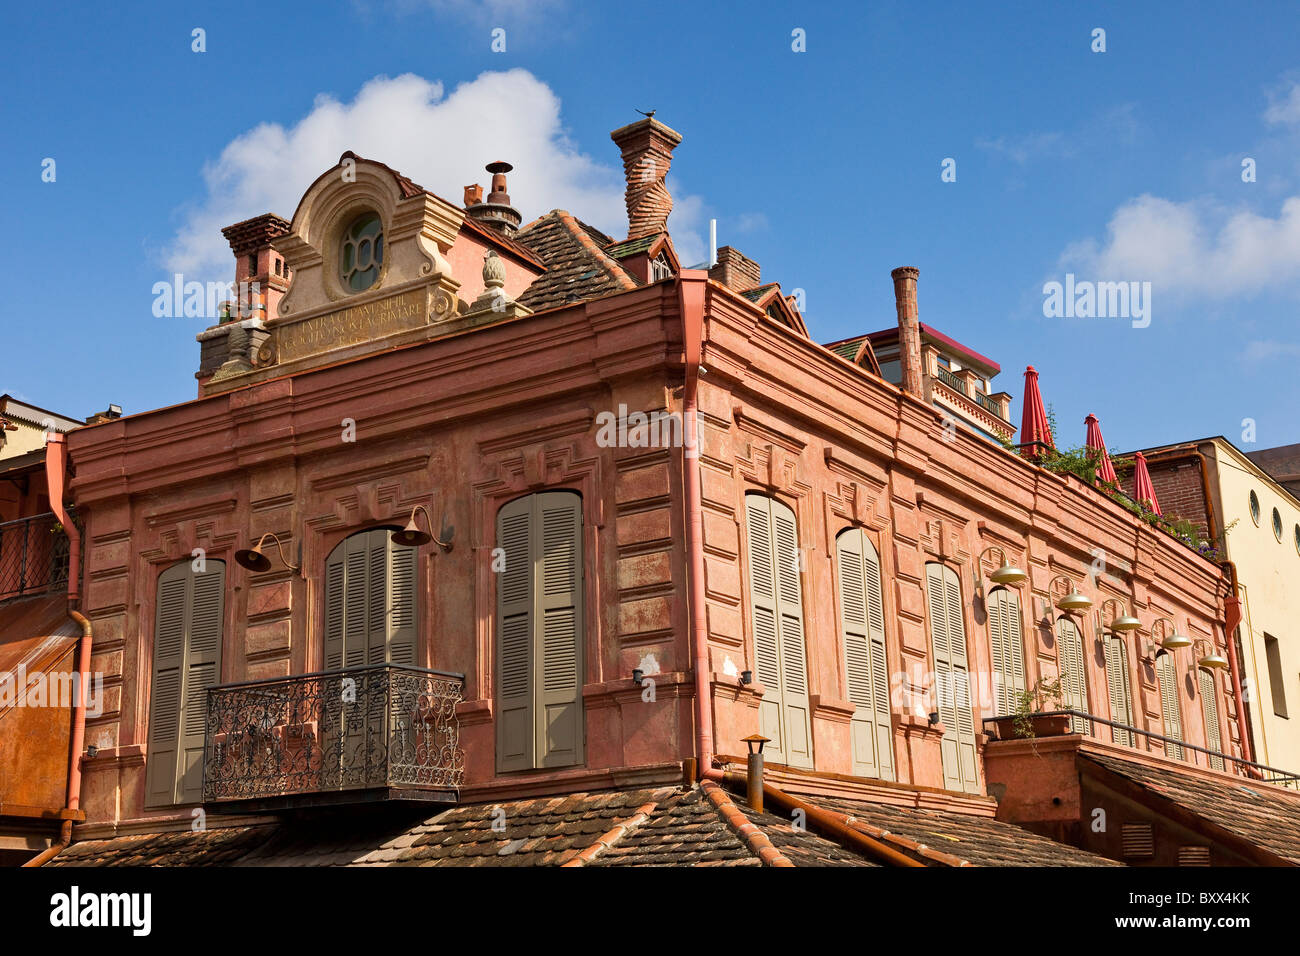 Newly restored building in Tbilisi old town, Kala, Georgia. JMH4005 Stock Photo